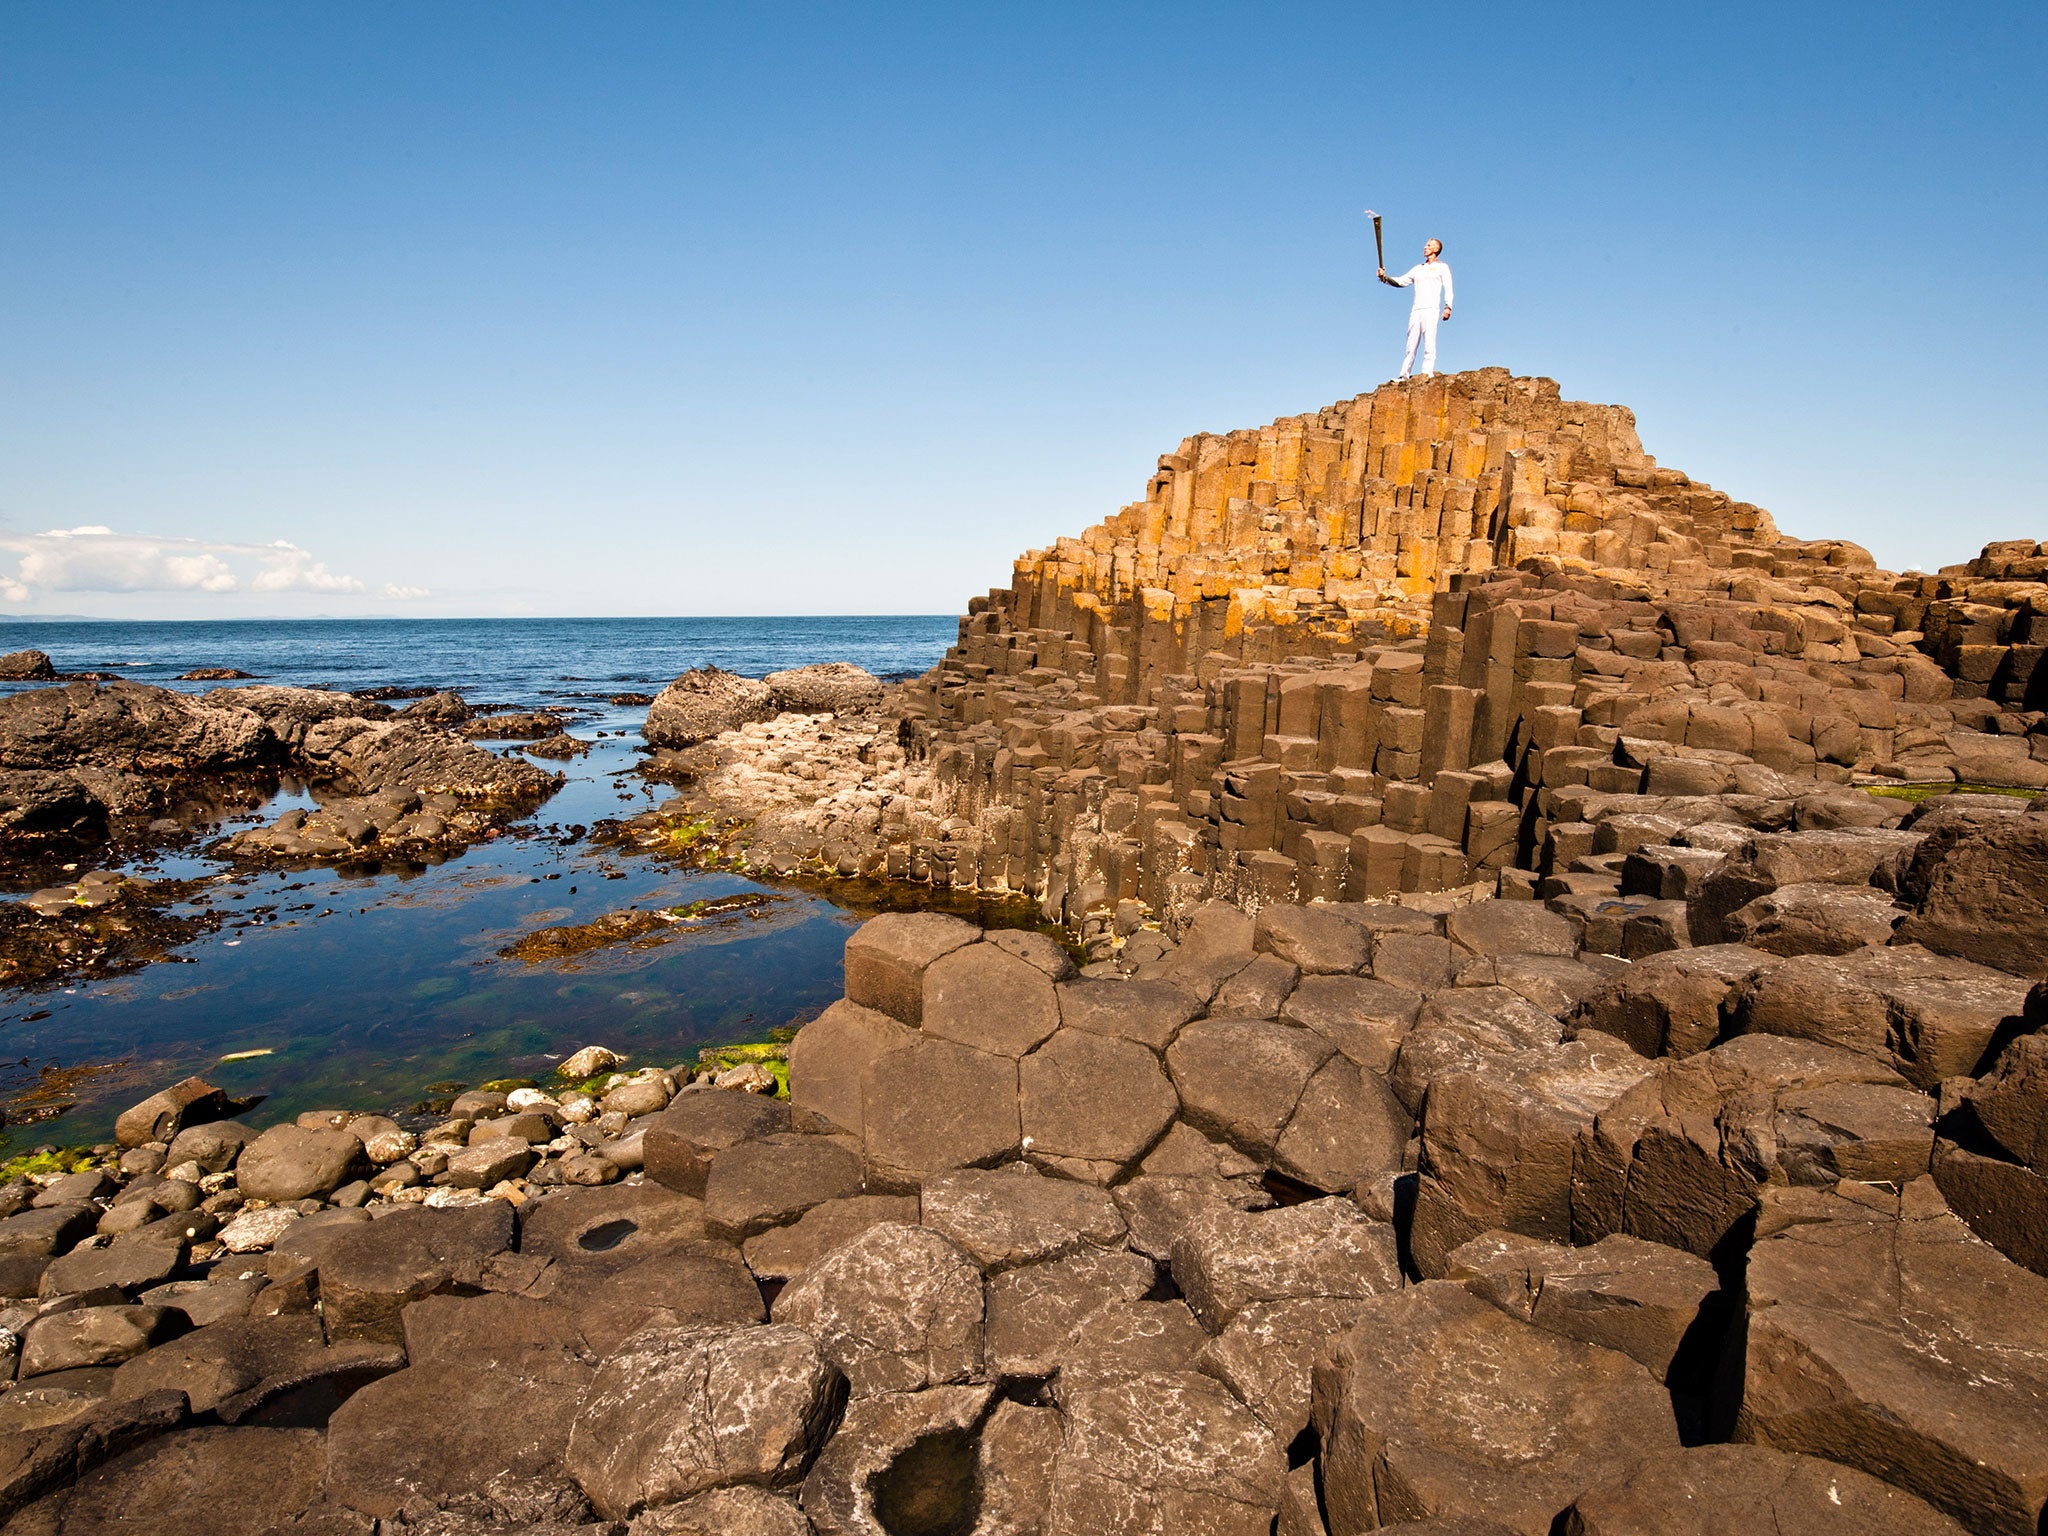 The Giant's Causeway in County Antrim, Northern Ireland